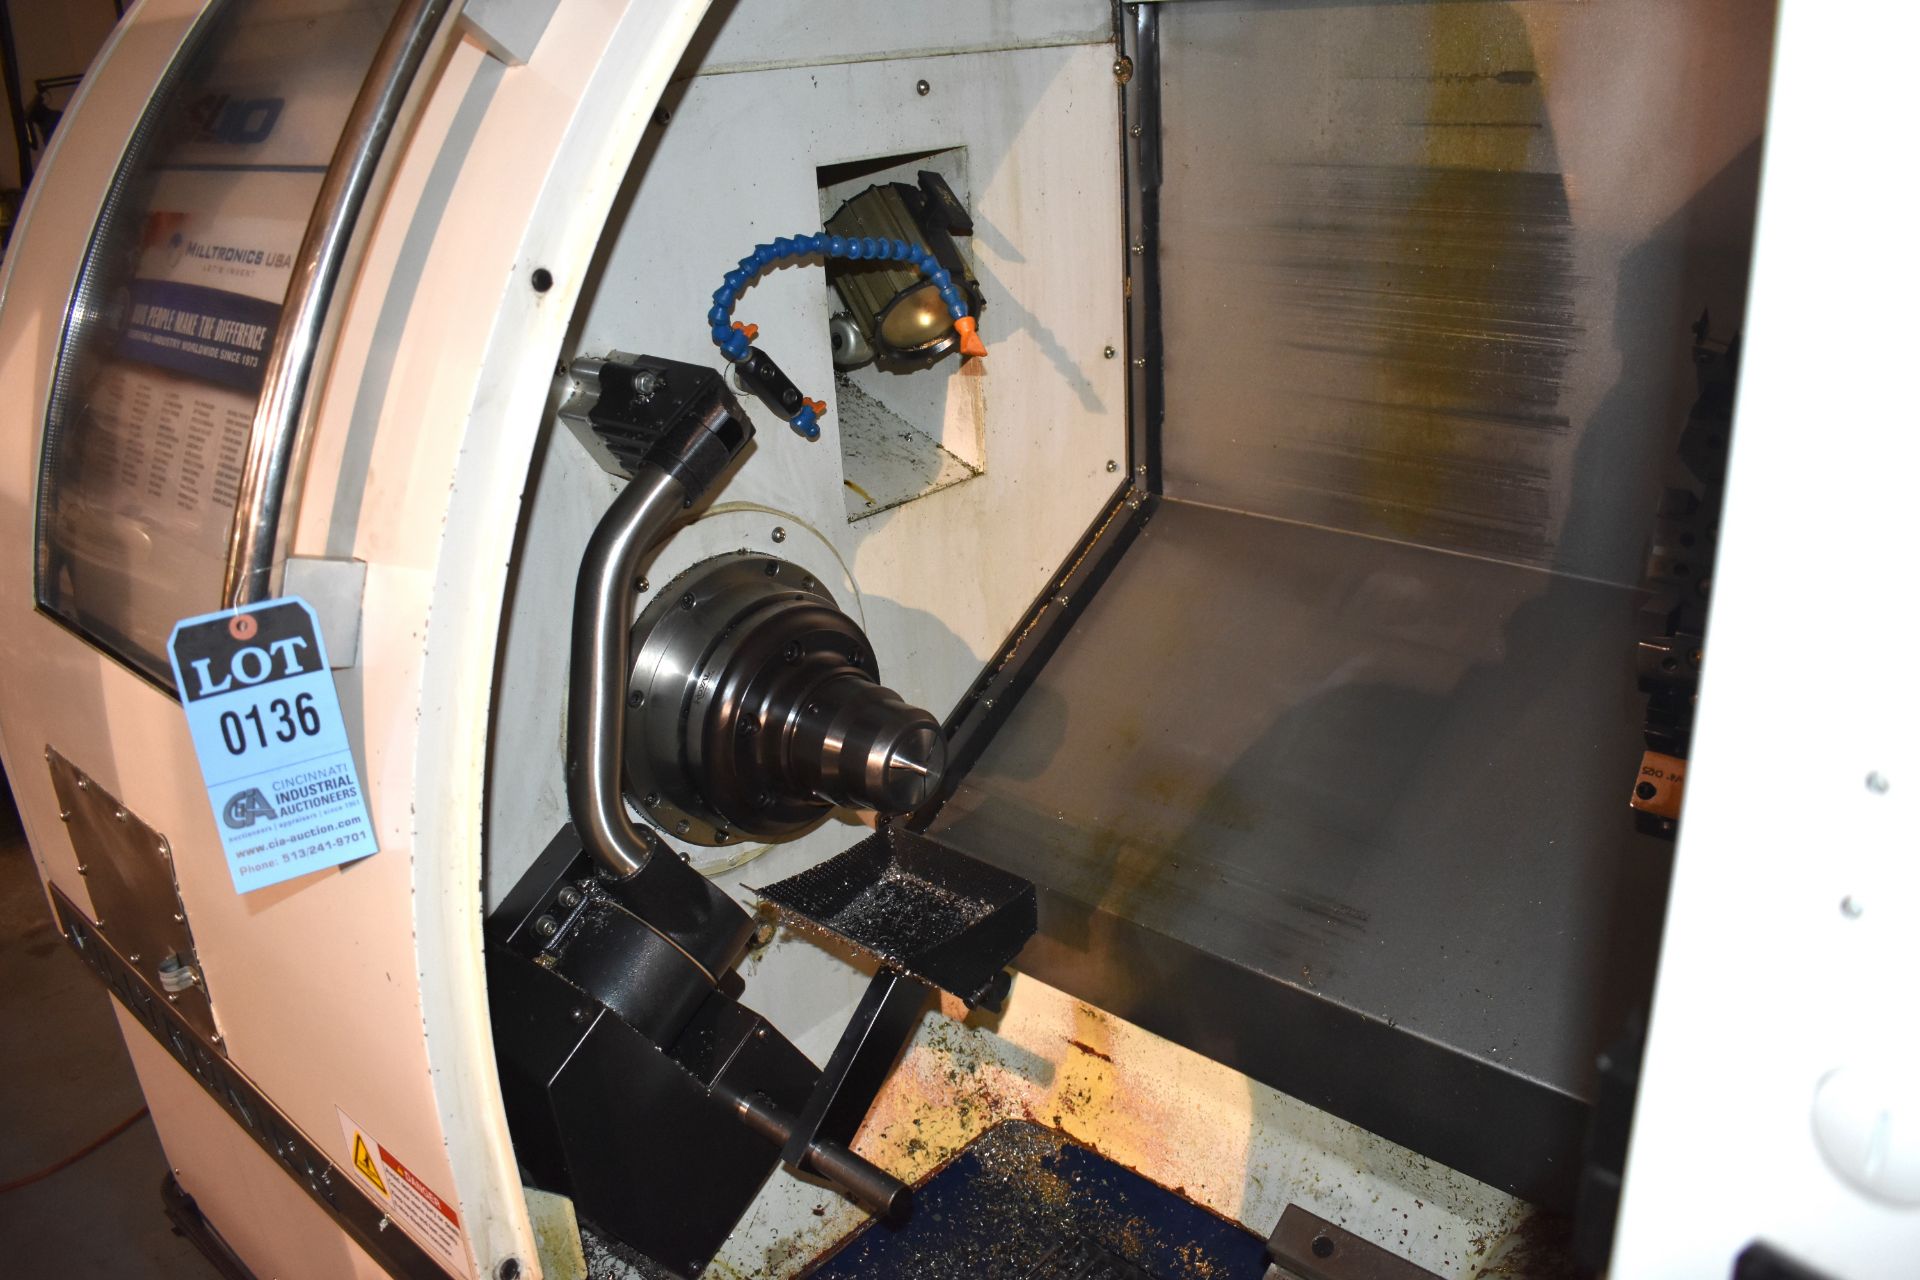 MILLTRONICS MODEL SL10 CNC TURNING CENTER; S/N 13003, COLLET CHUCK, TOOL PROBE, 12-POSITION - Image 5 of 7